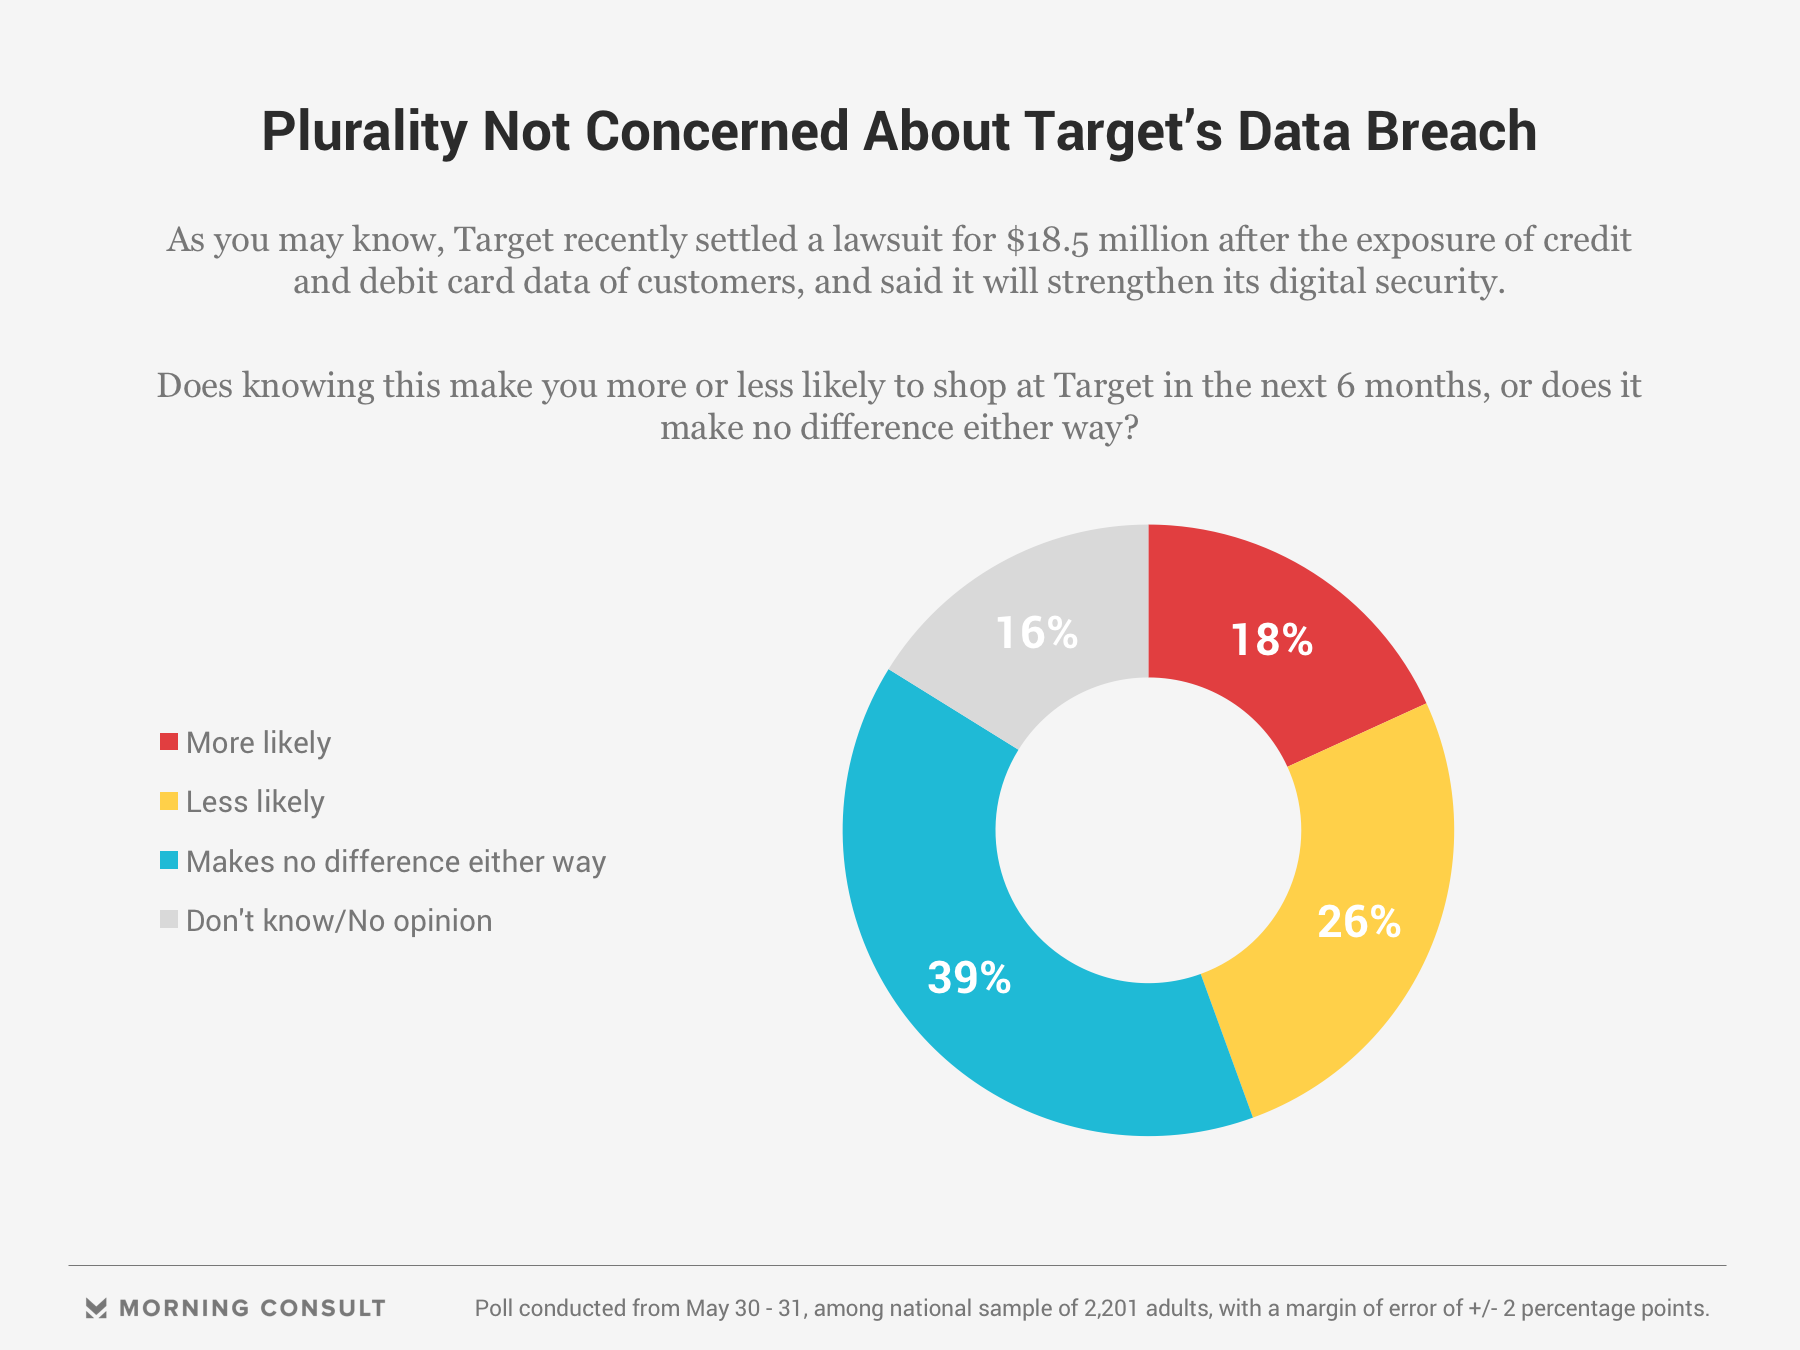 Target's Legal Fallout From Data Breach Has Limited Impact on Shopping